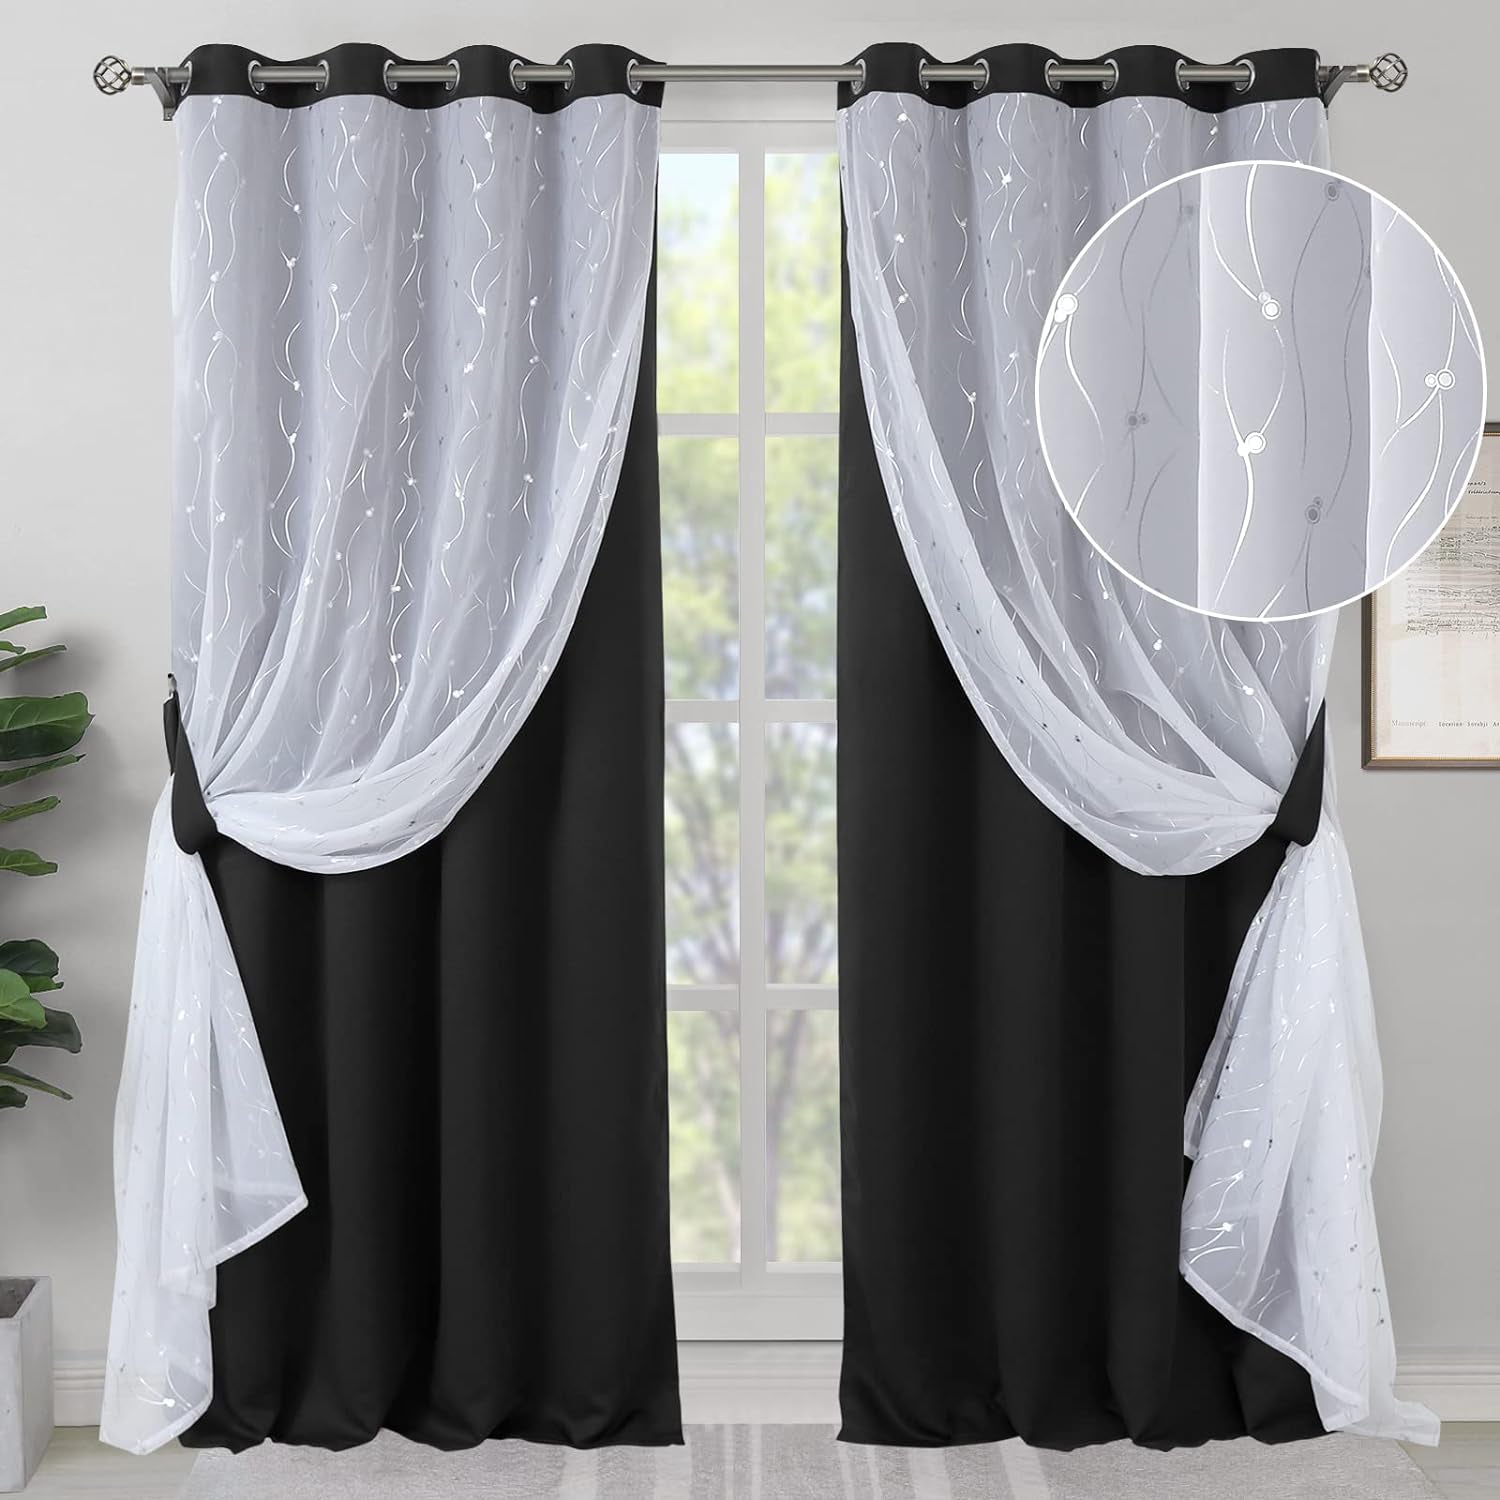 Bgment Grey Blackout Curtains with Sheer Overlay 84 Inches Long，Double Layer Silver Printed Kids Curtains Grommet Thermal Insulated Window Drapes for Living Room, 2 Panel, 52 X 84, Dark Grey  BGment Black 52W X 95L 